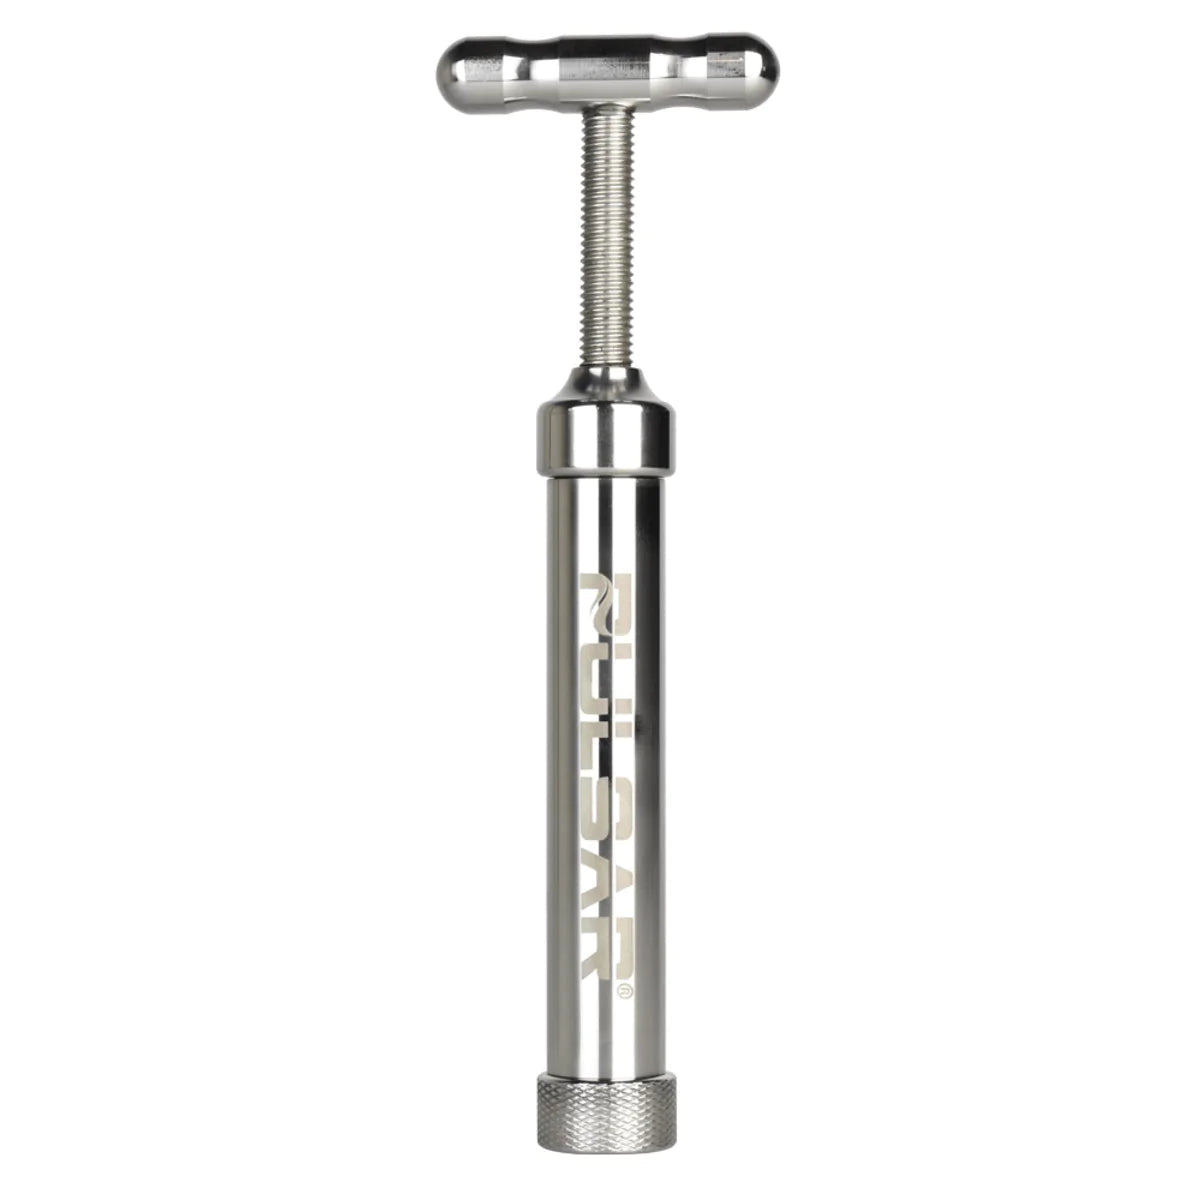 Pulsar Stainless Steel Pollen T-Press, Small Variant, Durable for Dry Herbs - Front View